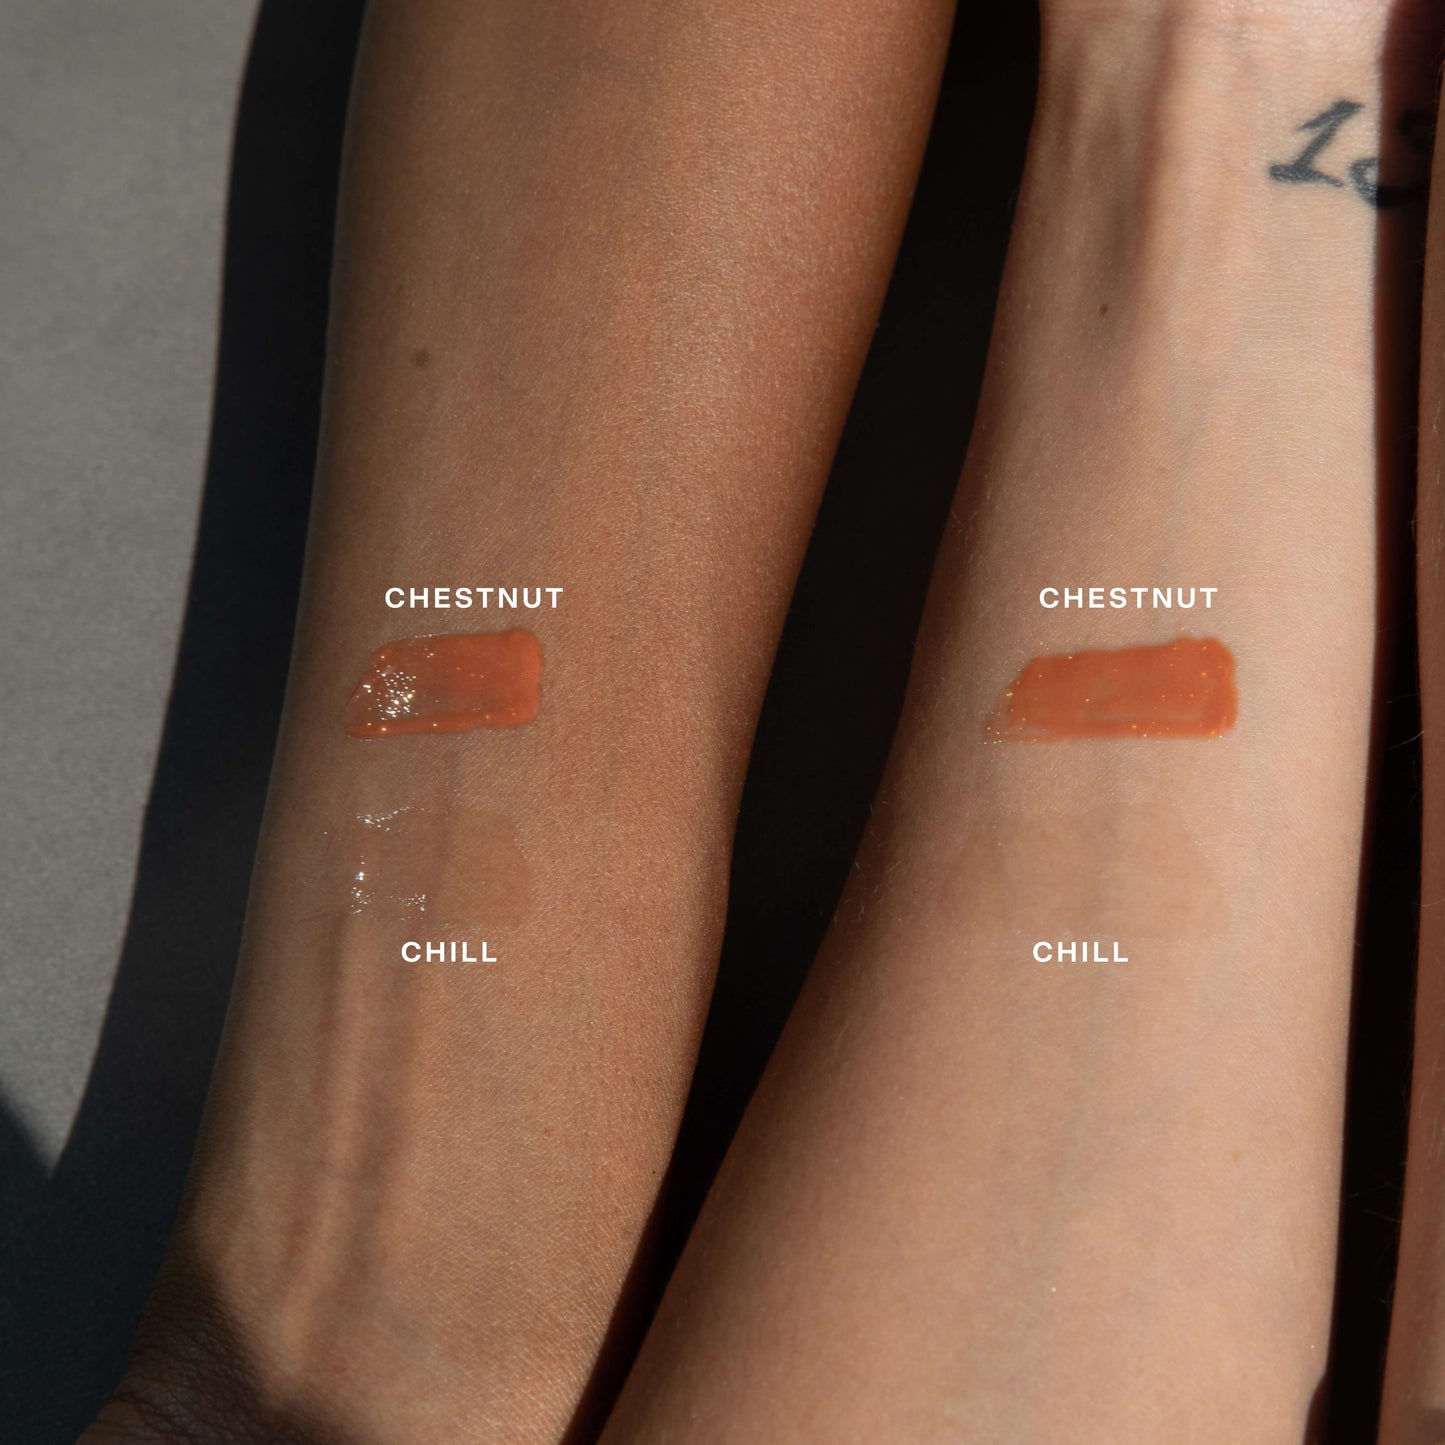 [Shared: The shades Chestnut and Chill of Tower 28 Beauty's ShineOn Lip Jelly swatched on two different skin tones]